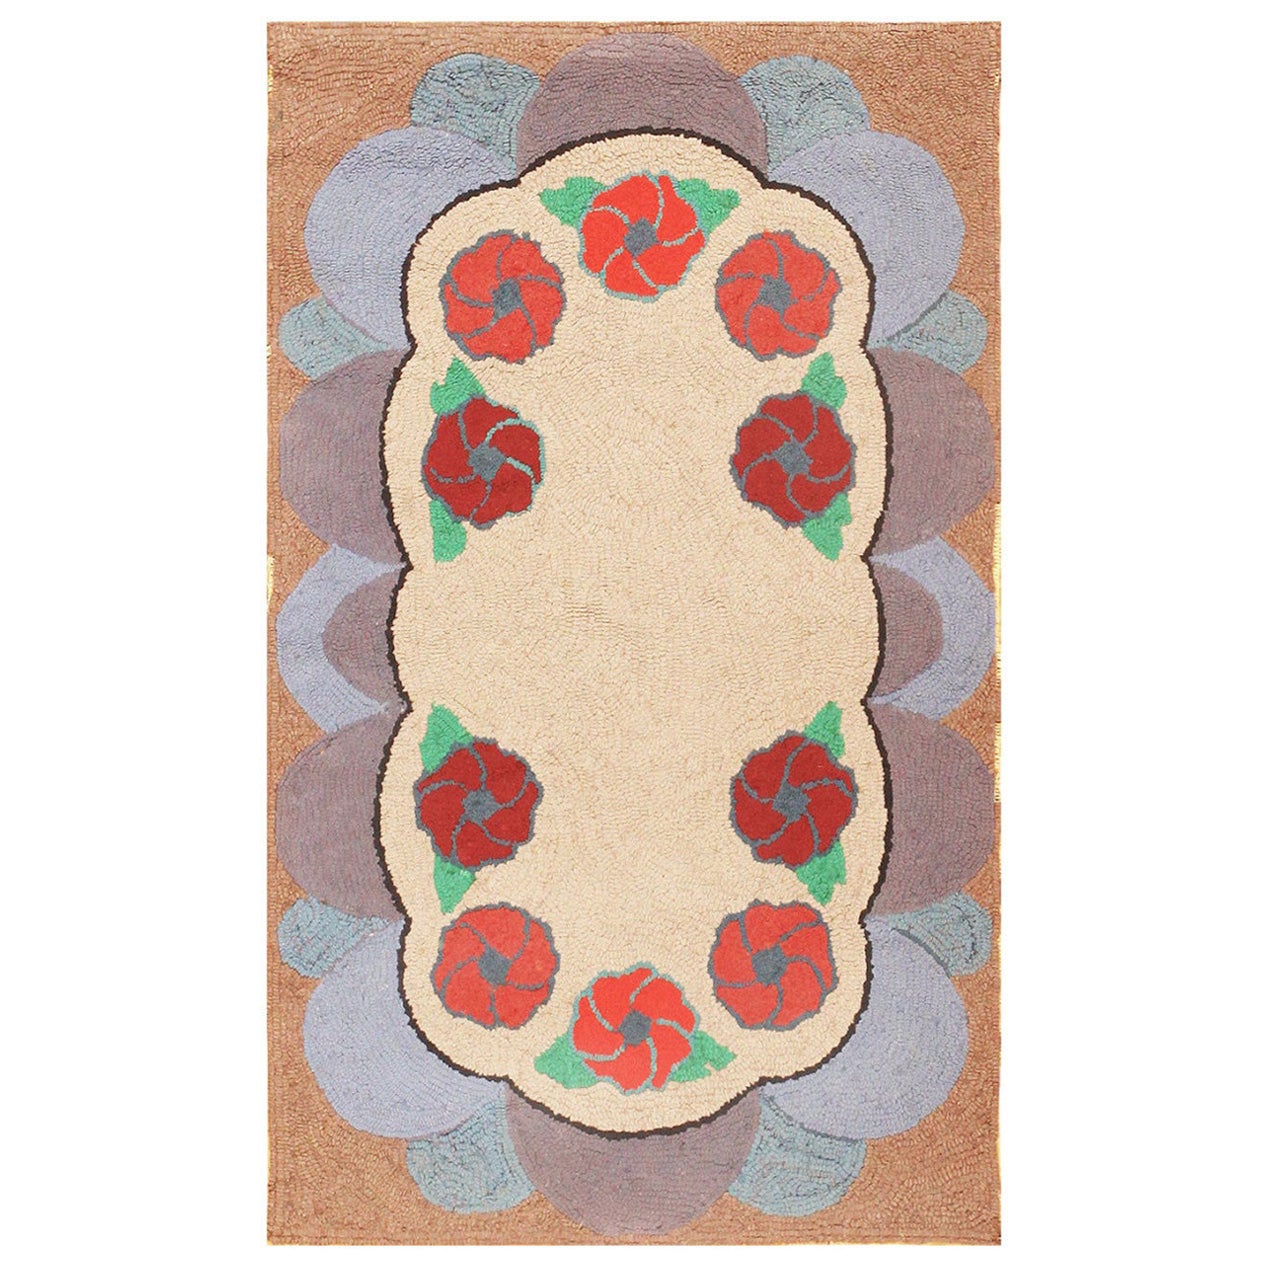 Soft Pastel Antique Floral American Hooked Rug 2'4" x 3'9"